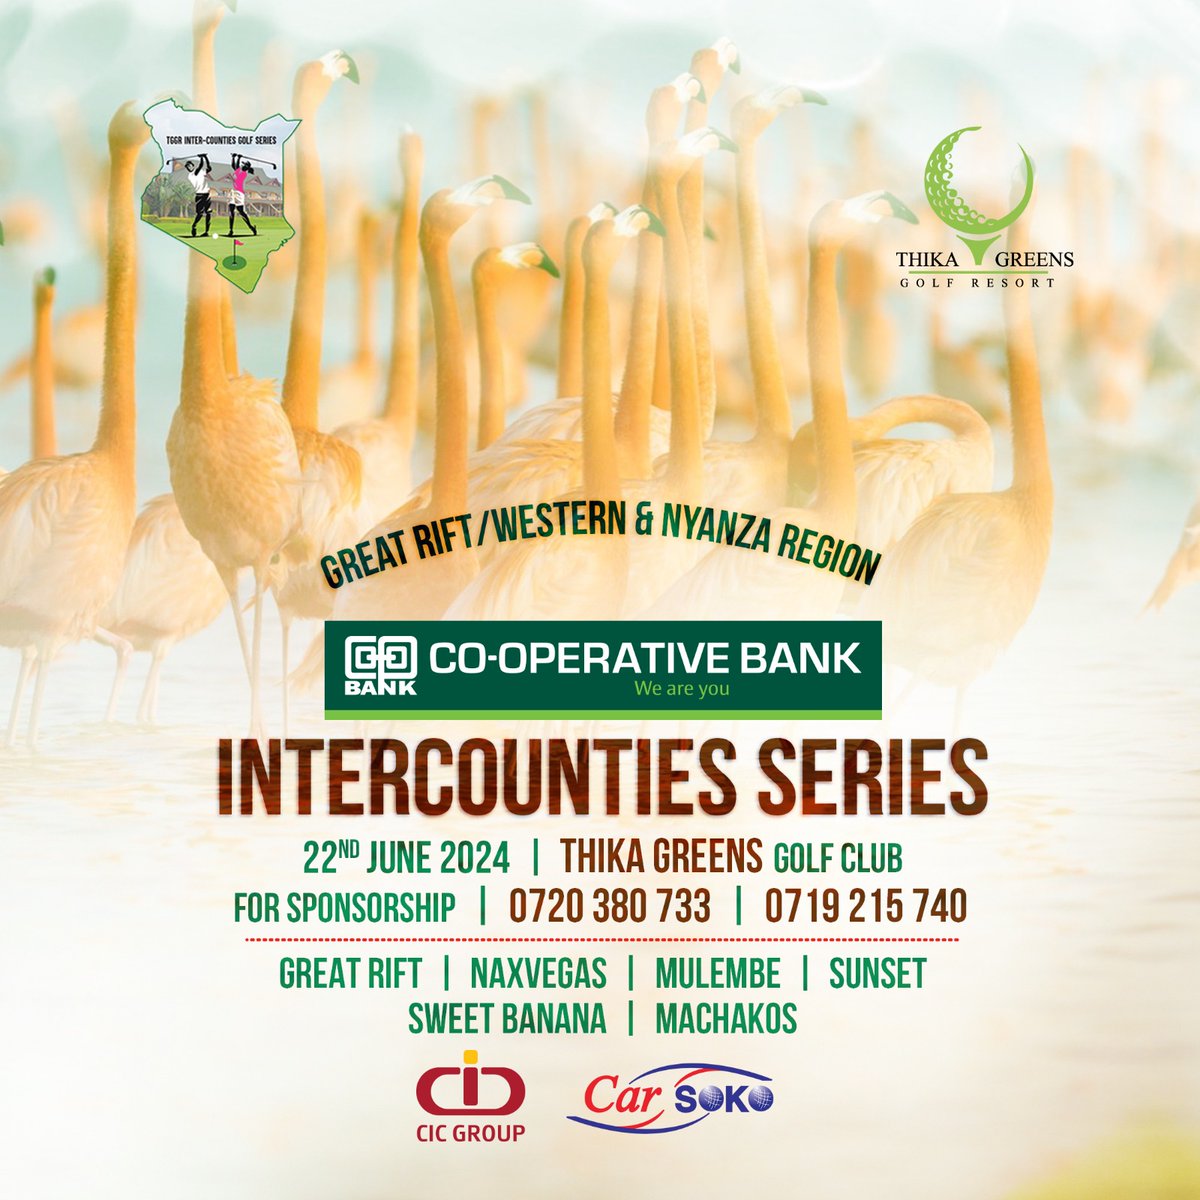 Mark your calendars! The Inter County Golf  Series is back on June 22nd, 2024, at Thika Greens Golf Resort. 🏌️‍♂️ Get ready for an epic showdown as we host teams from the Great Rift, Western,Nyanza regions! Who will emerge victorious? #InterCountySeries #GolfCompetition #ThikaGreens